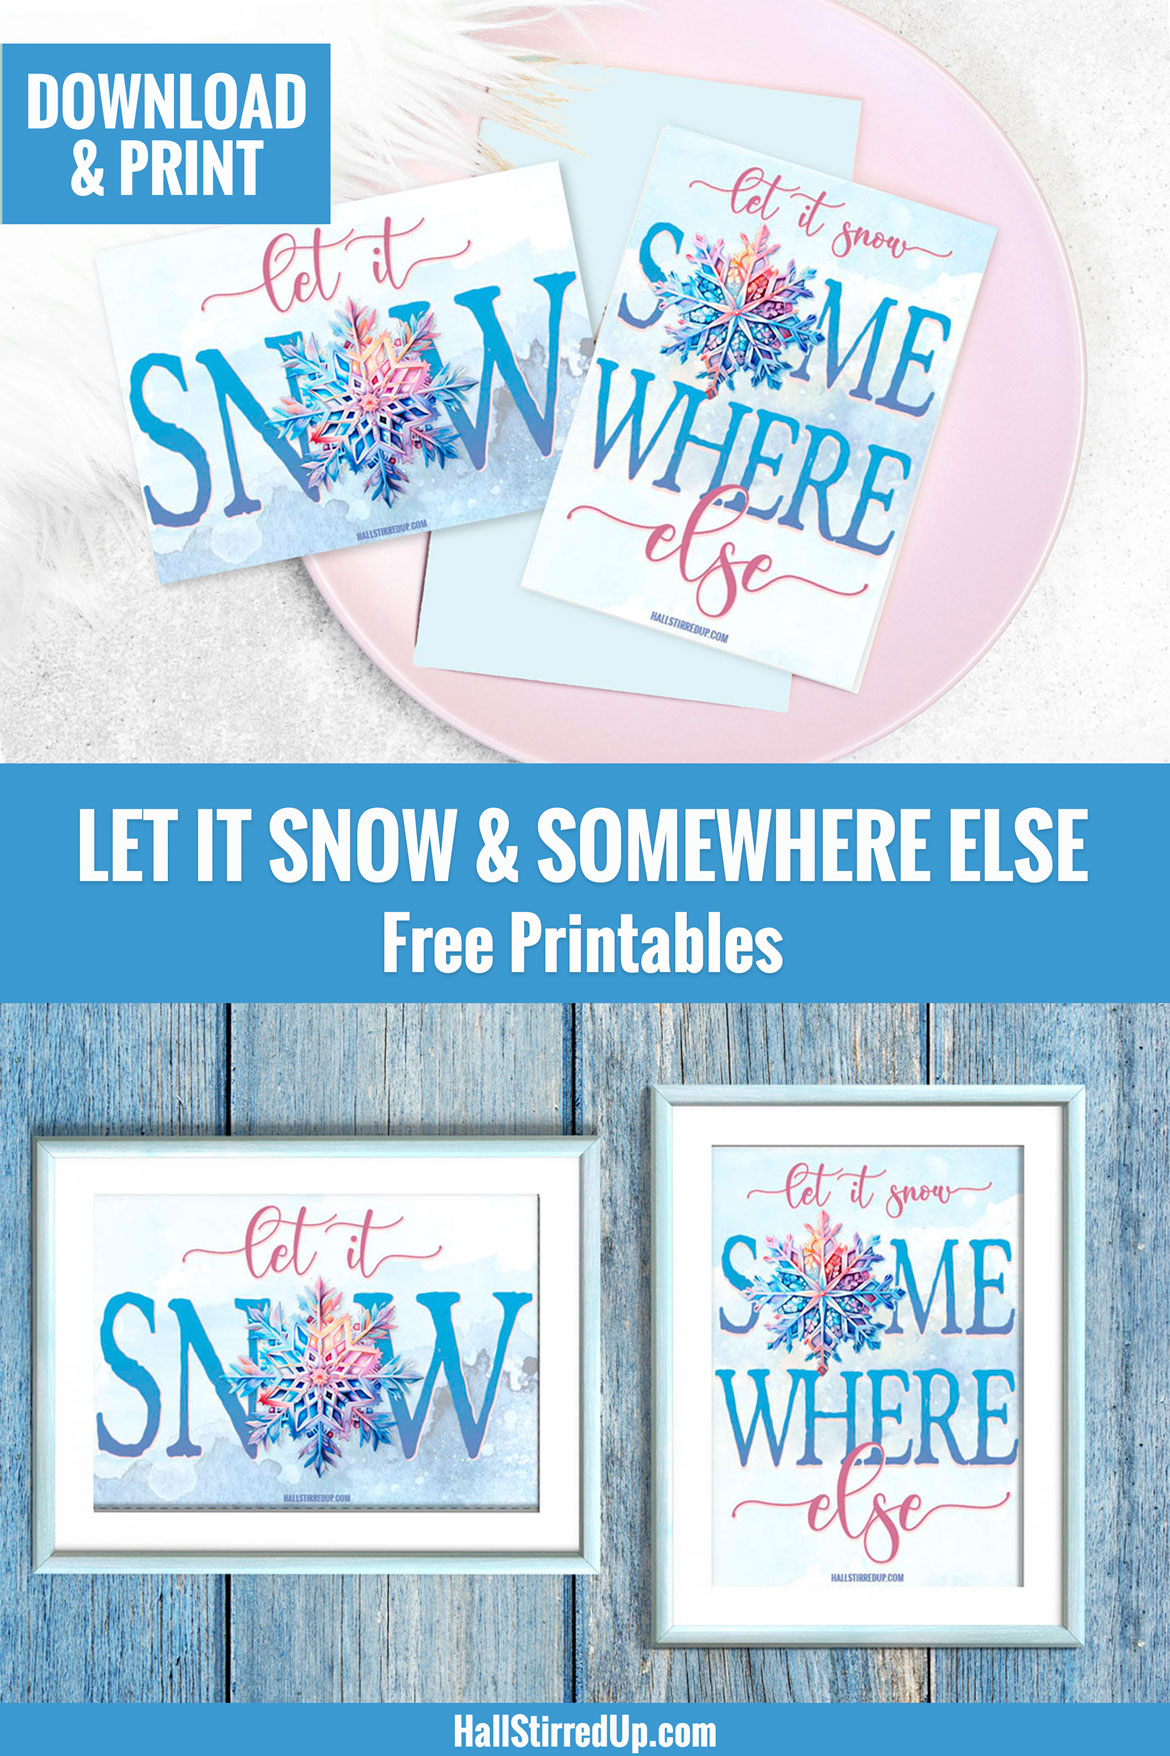 Are you Snow Yay or Nay? Includes 2 fun free printables